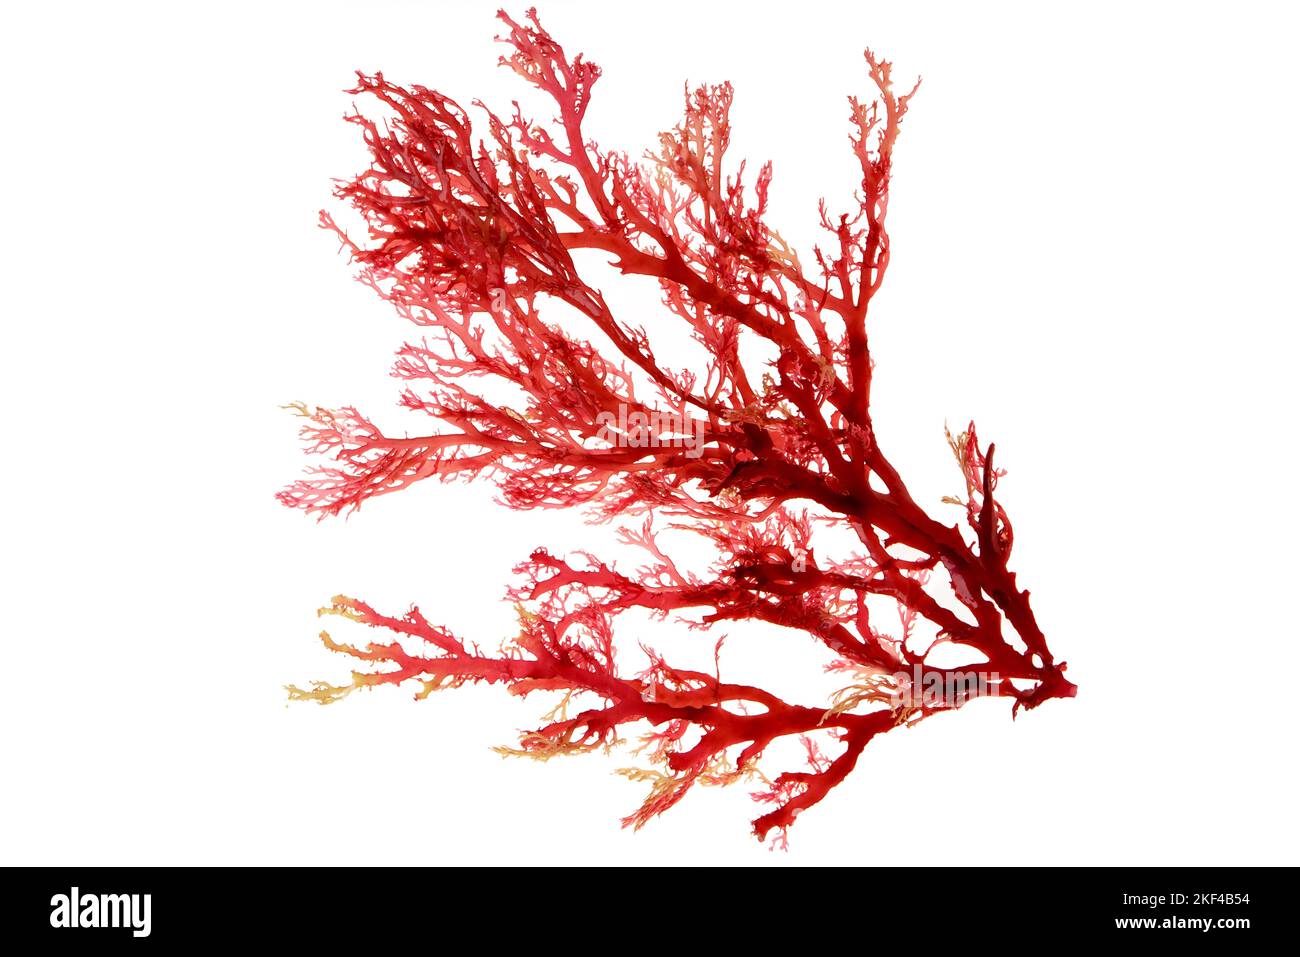 Red algae or seaweed branch isolated on white Stock Photo